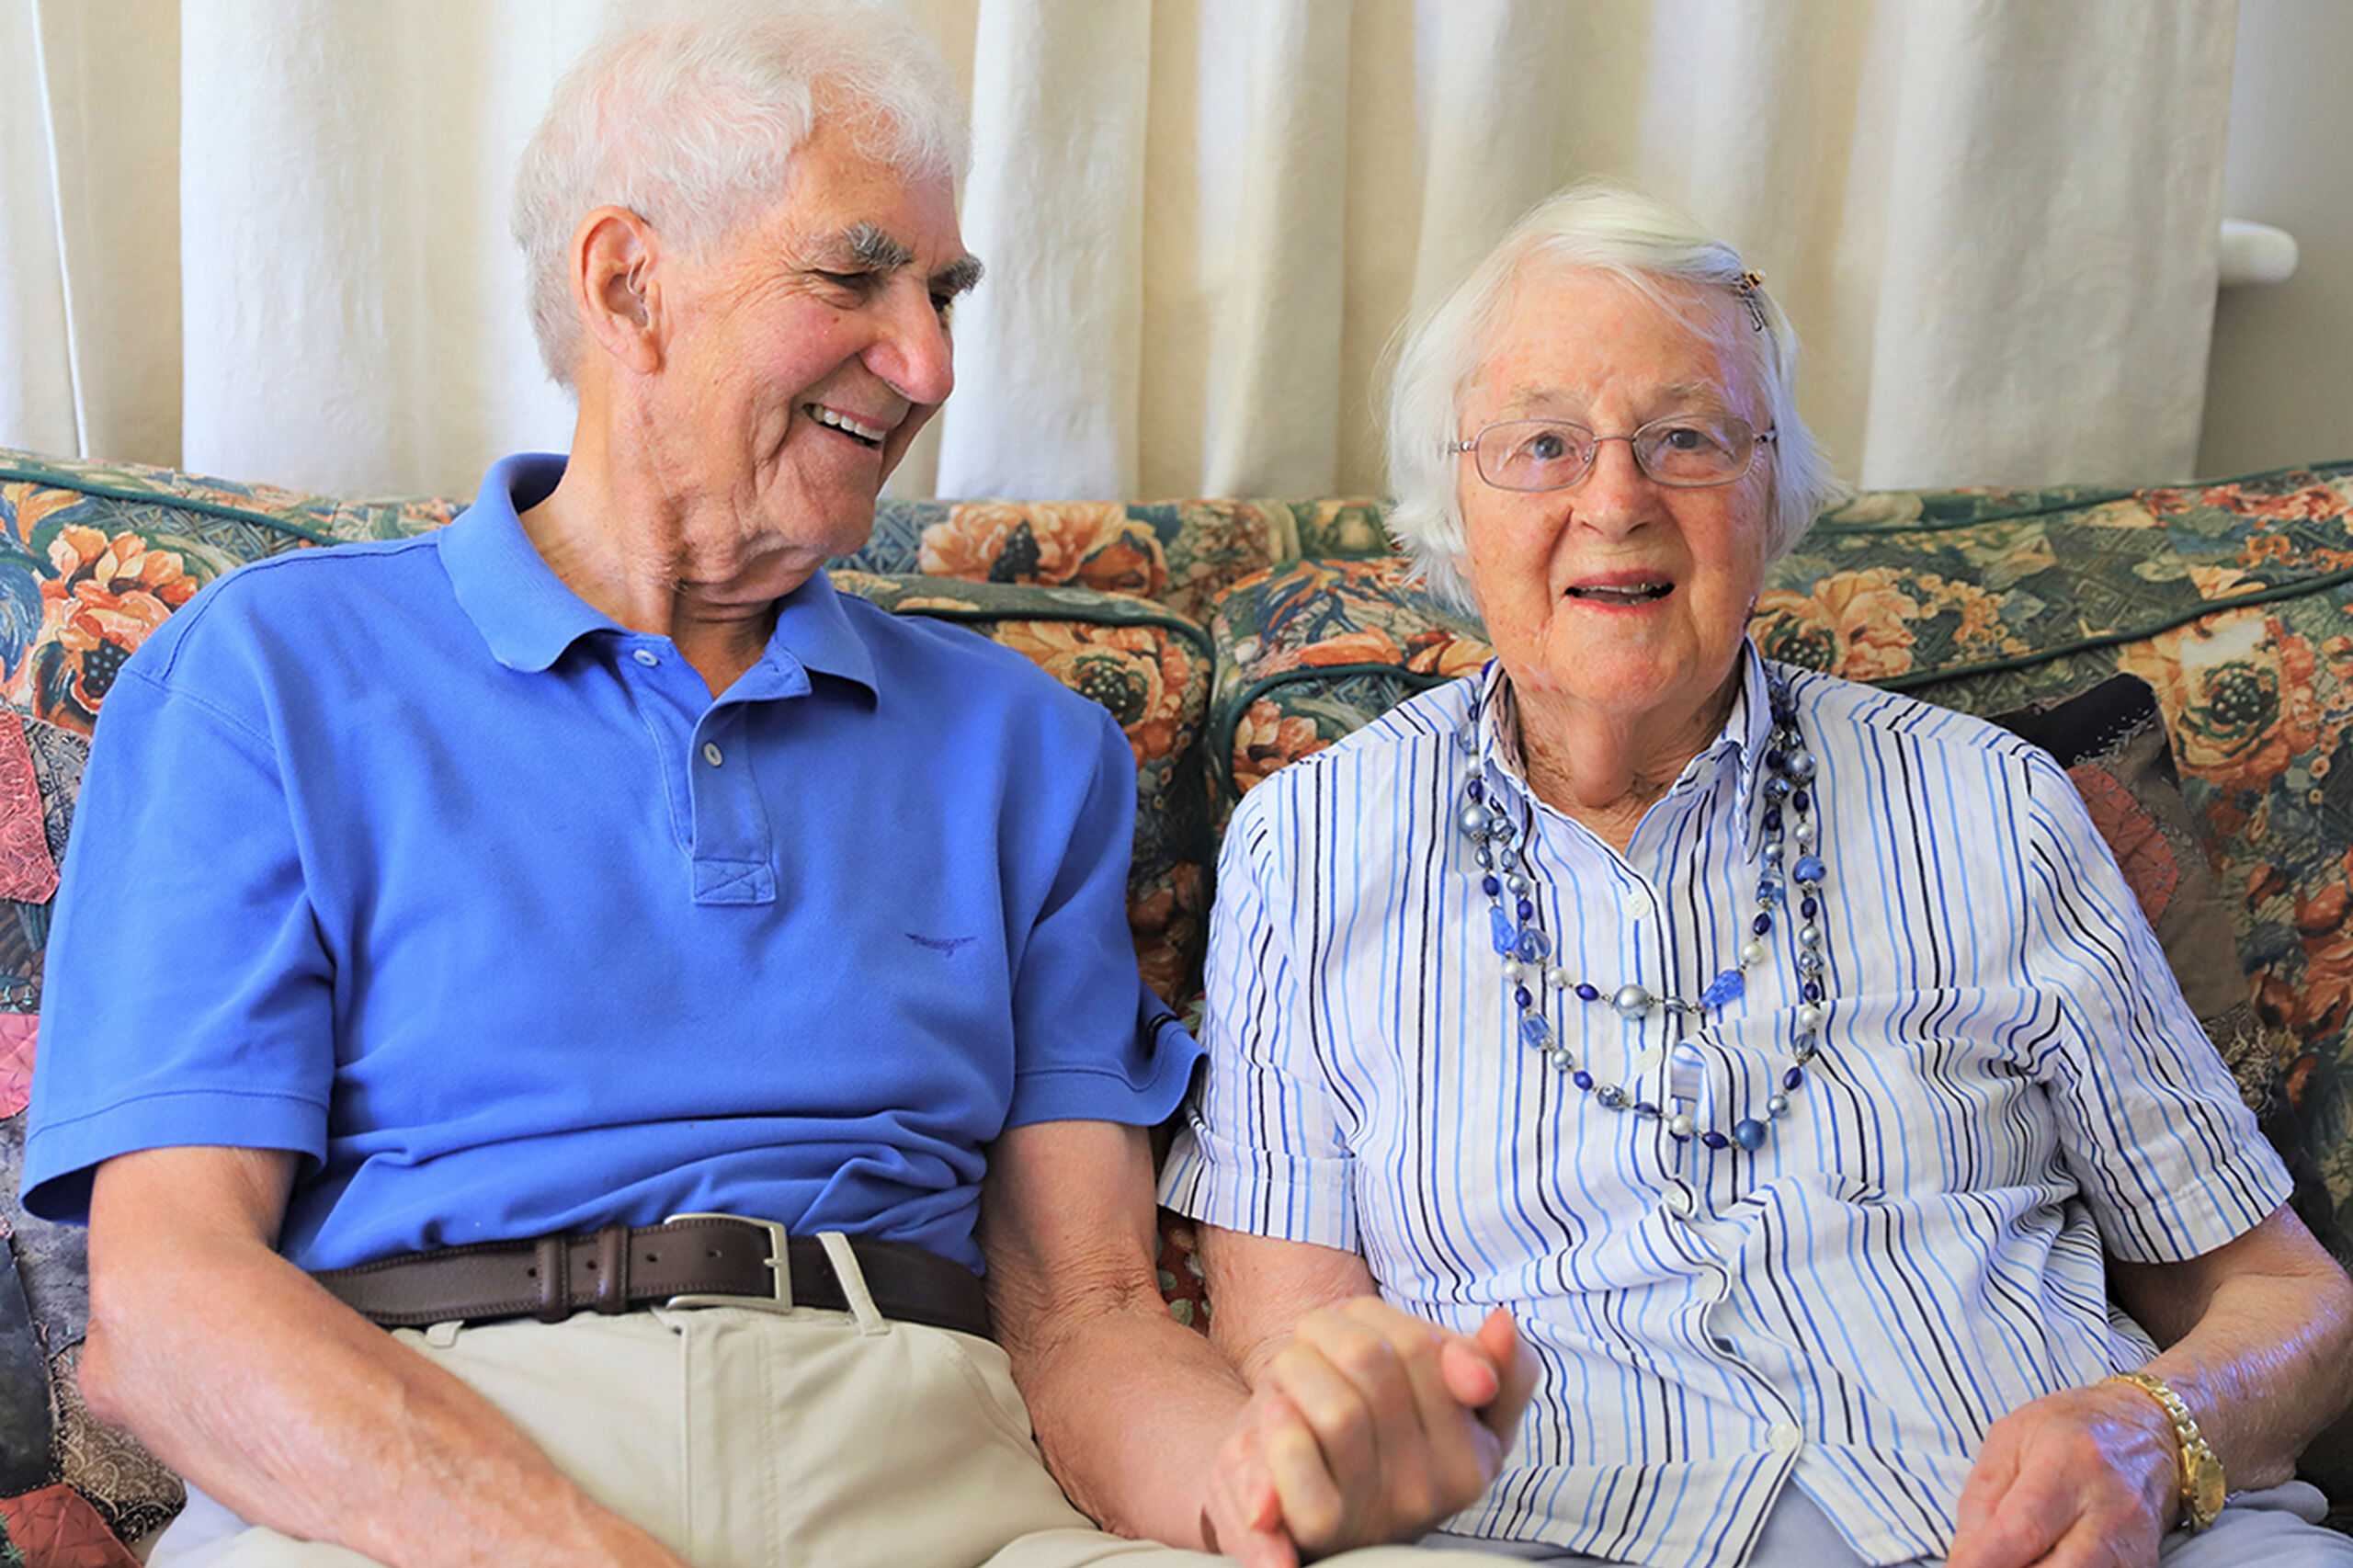 Baptistcare home care services helps Melville couple stay independent